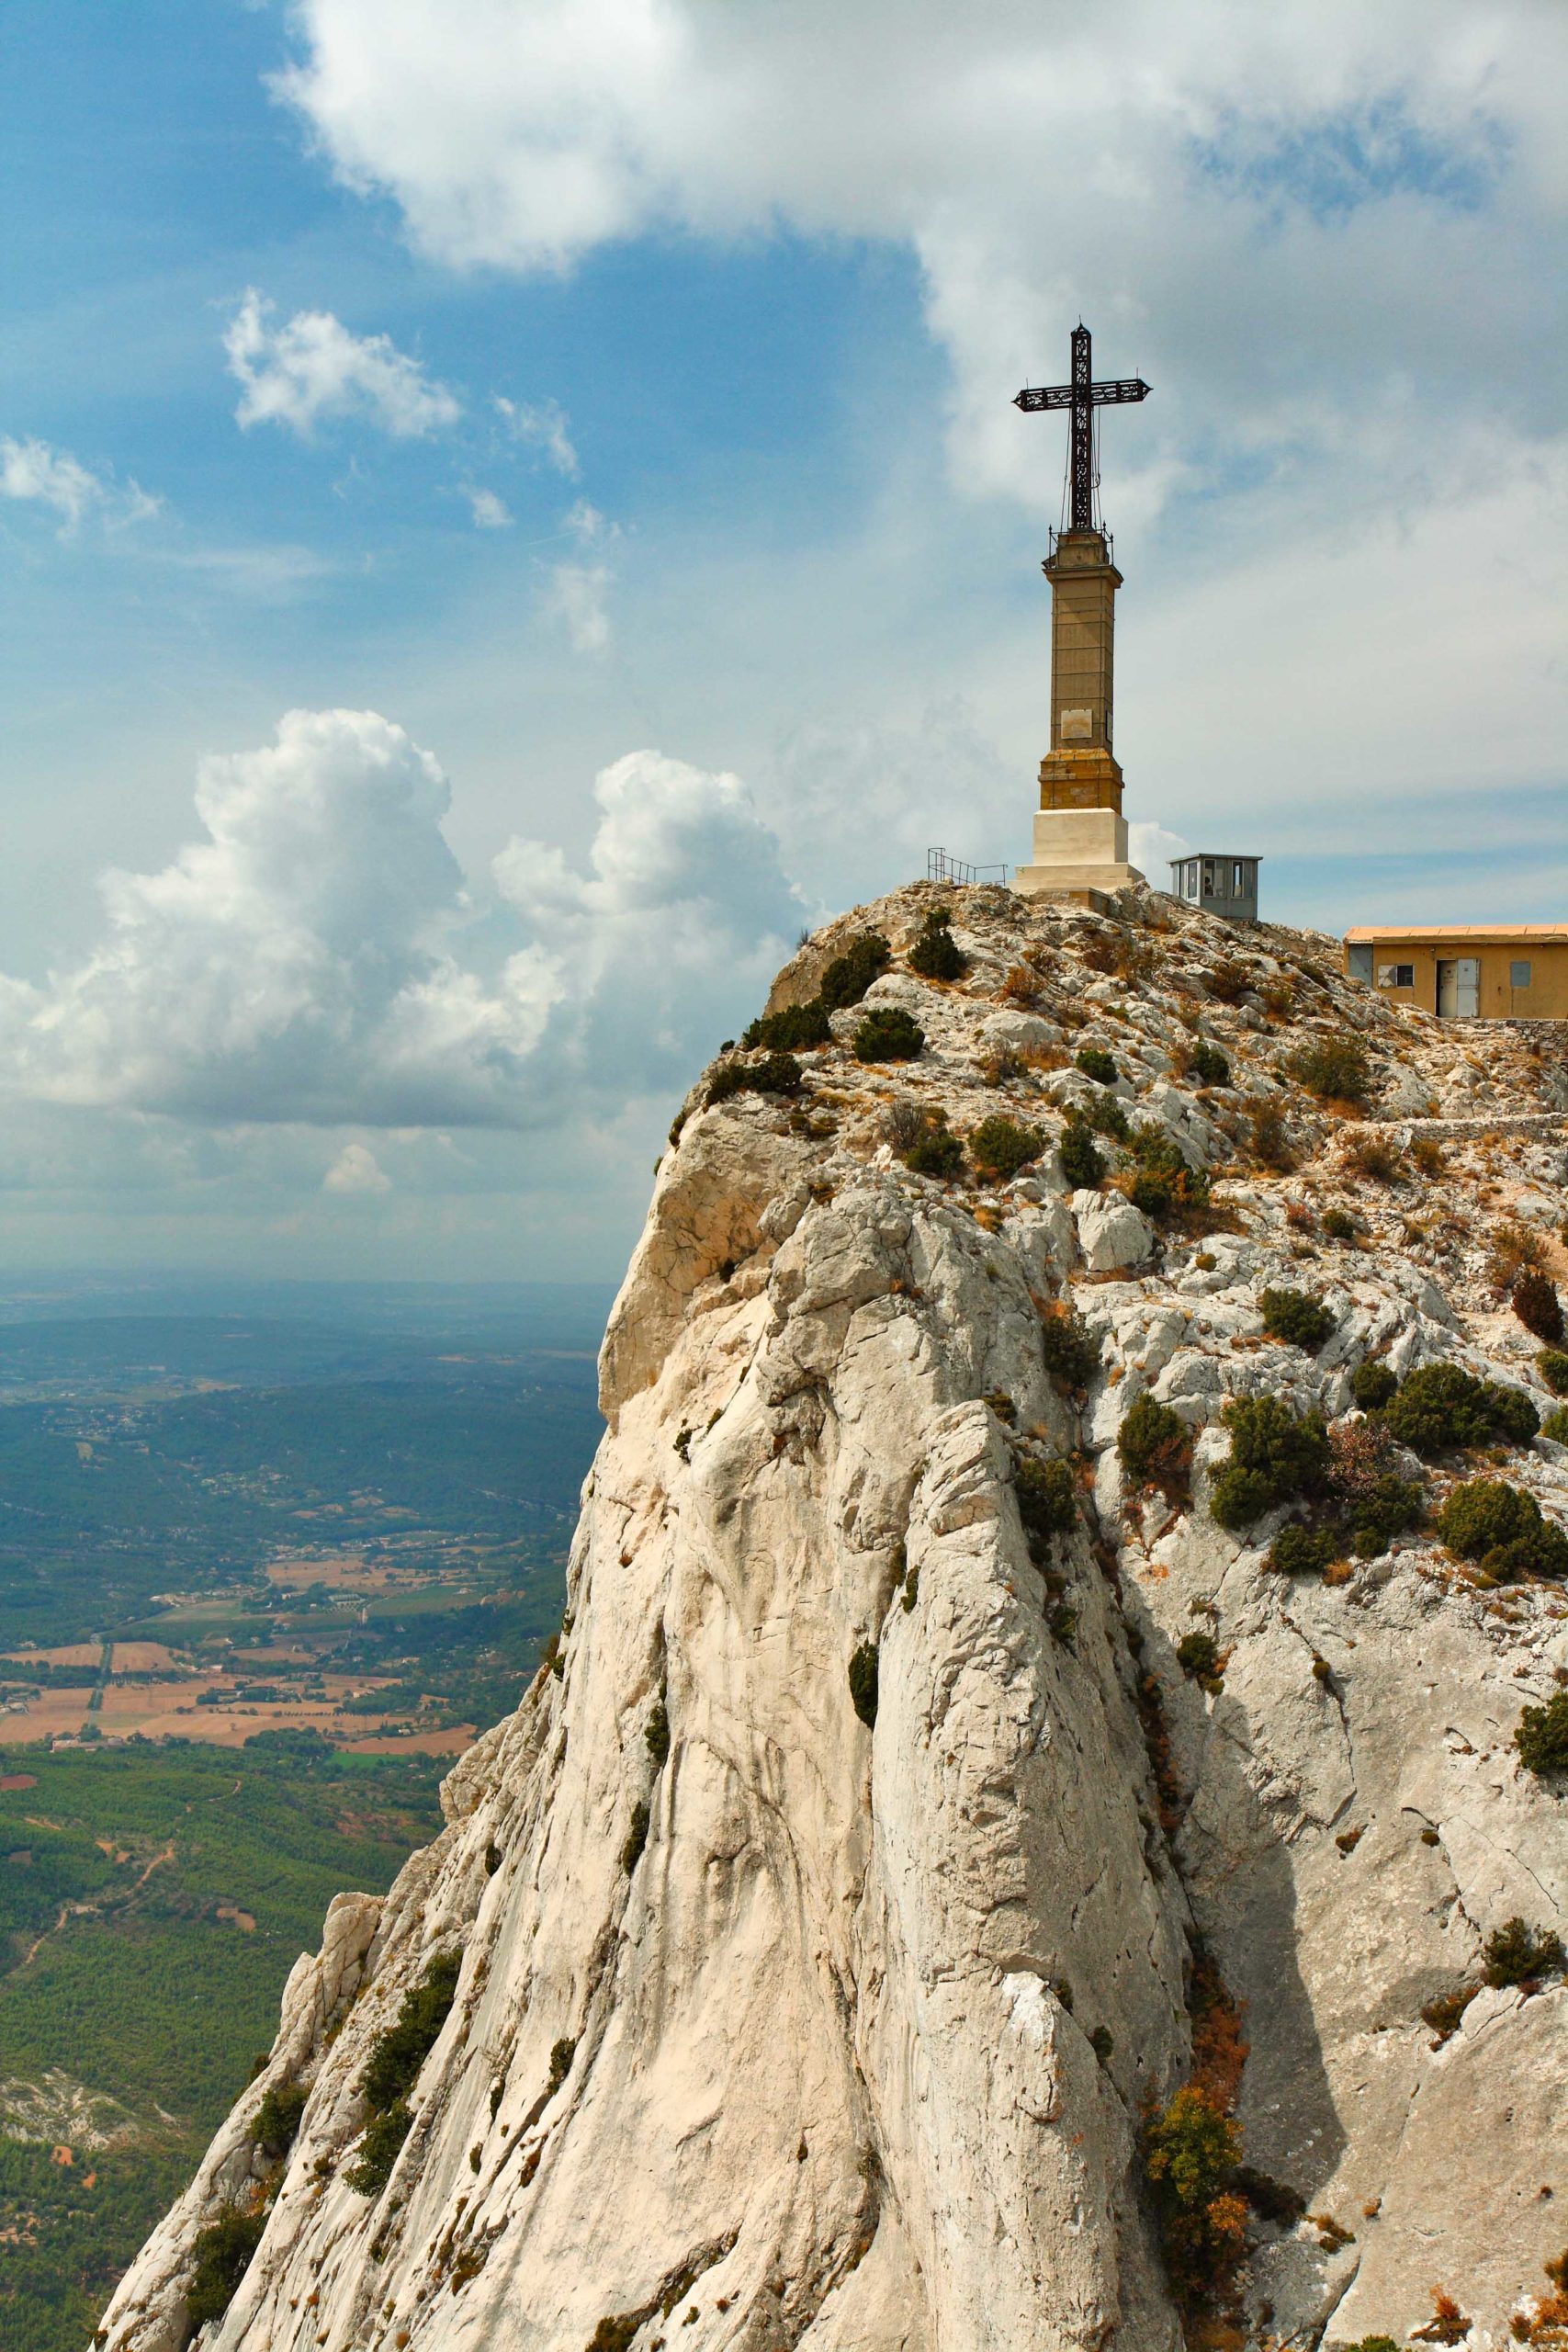 Croix de Provence of Montagne Sainte-Victoire © Benh LIEU SONG - licence [CC BY-SA 3.0] from Wikimedia Commons